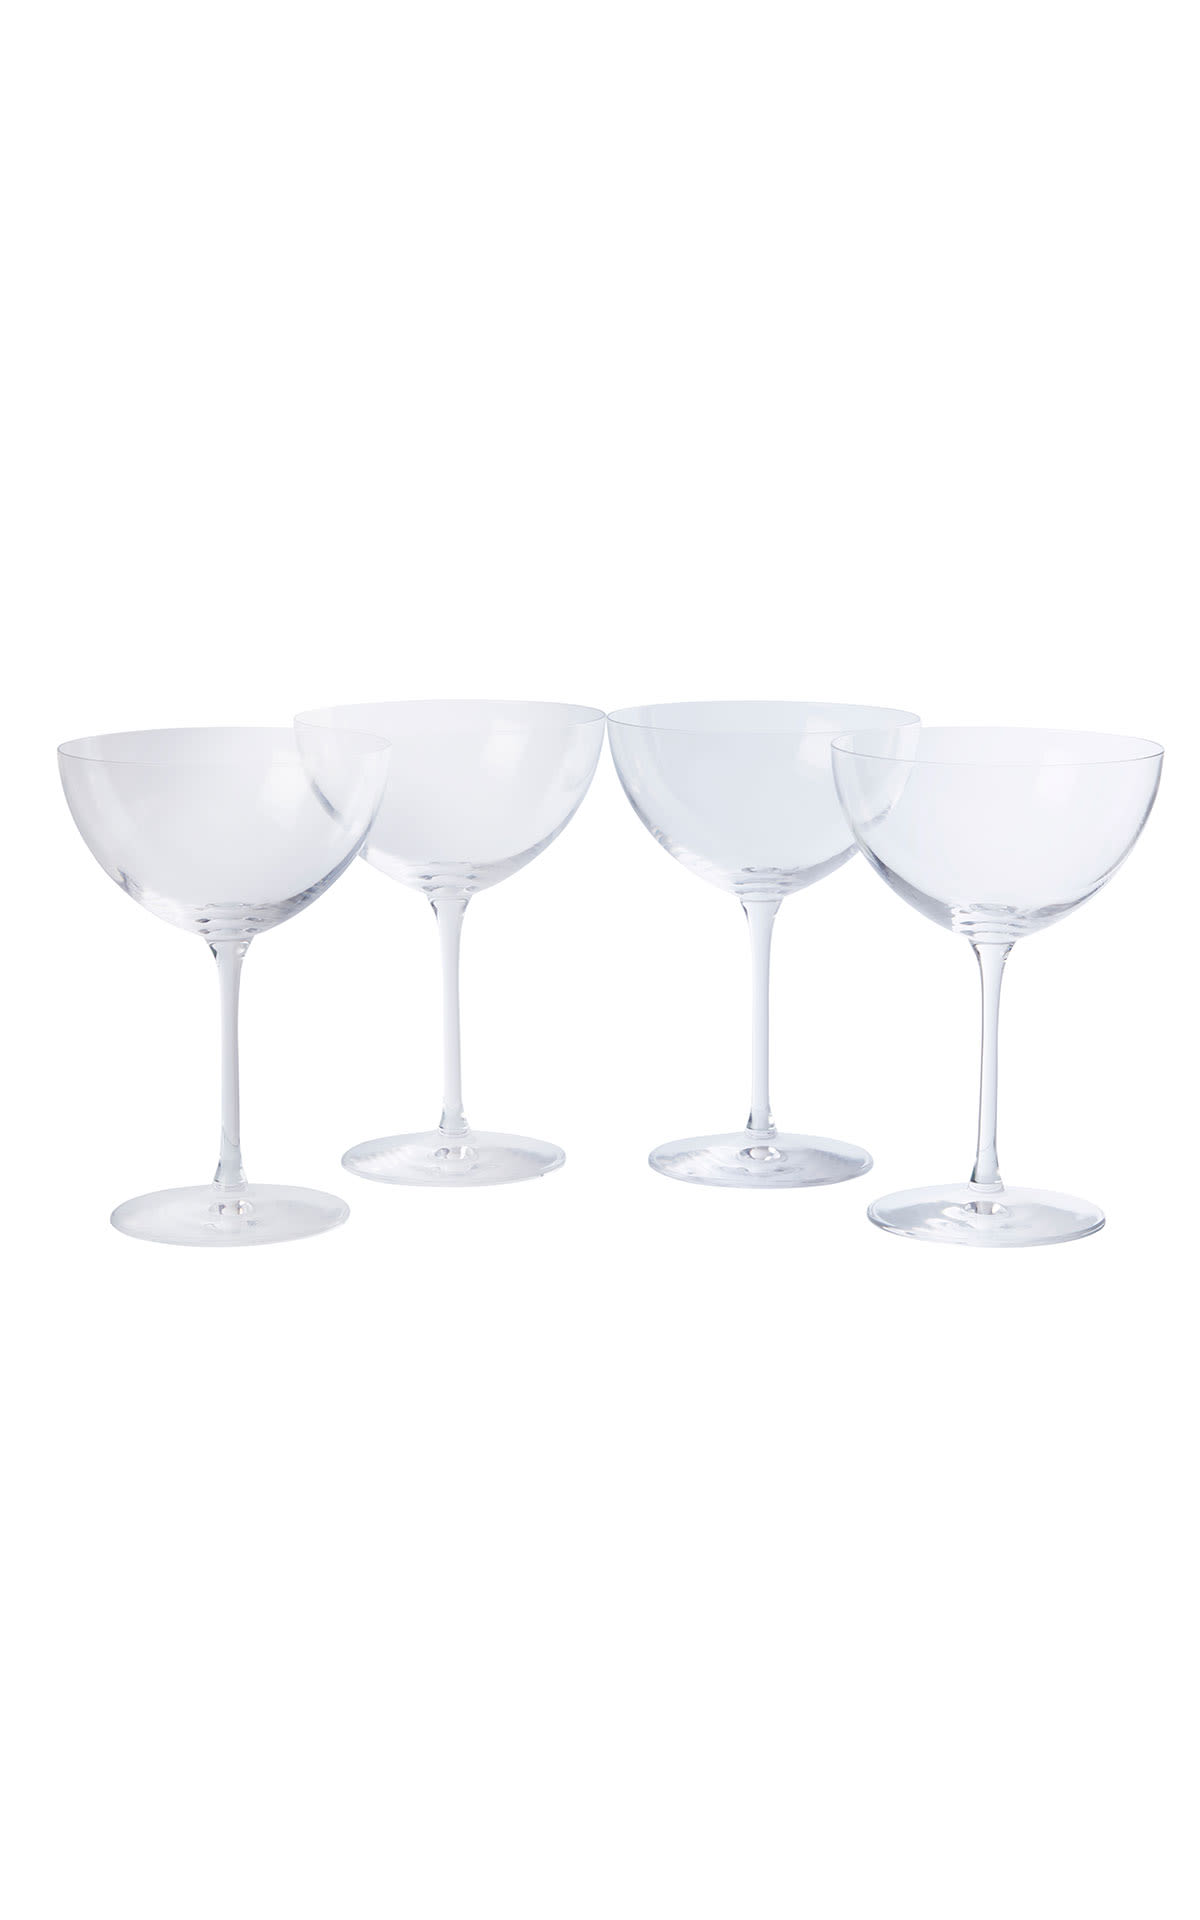 The White Company Champagne coupe glasses set from Bicester Village